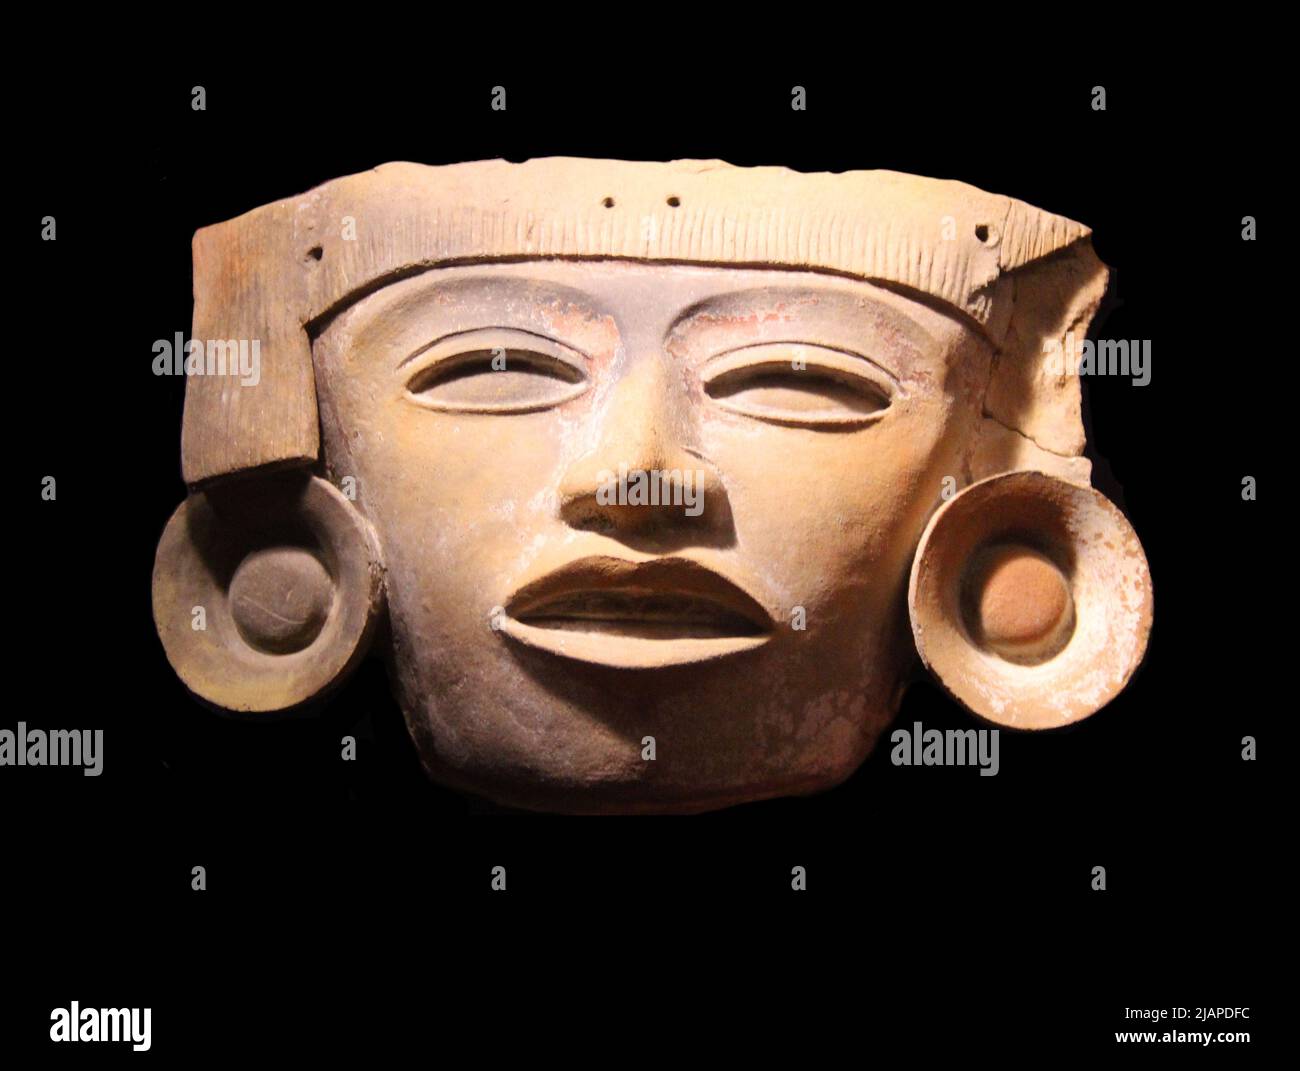 Ceramic mask from Teotihuacan, Mexico City, Mexico.  Ancient Americas Gallery, Field Museum of Natural History, Chicago, Illinois, USA. Editorial Use Only. Stock Photo